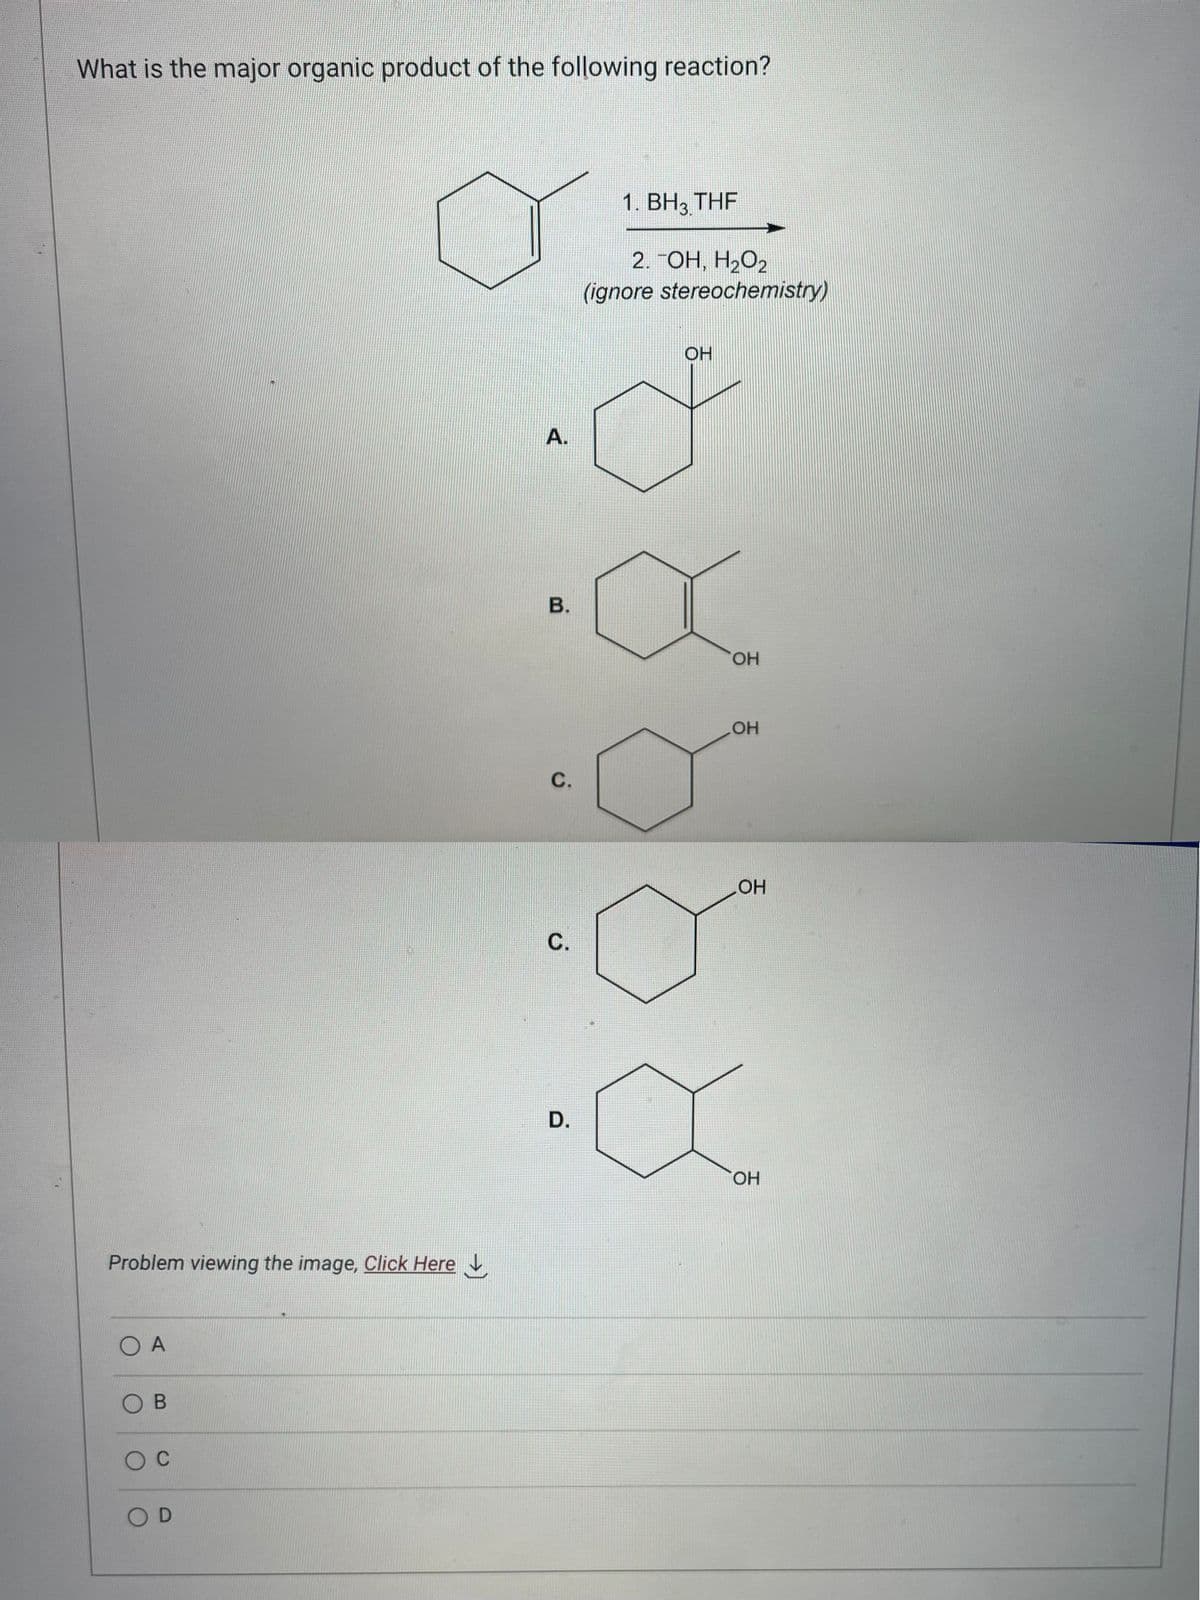 What is the major organic product of the following reaction?
Problem viewing the image, Click Here
O A
OB
O C
OD
A.
B.
C.
Ü
D.
1. BH3 THF
2. TOH, H₂O2
(ignore stereochemistry)
OH
OH
OH
OH
OH